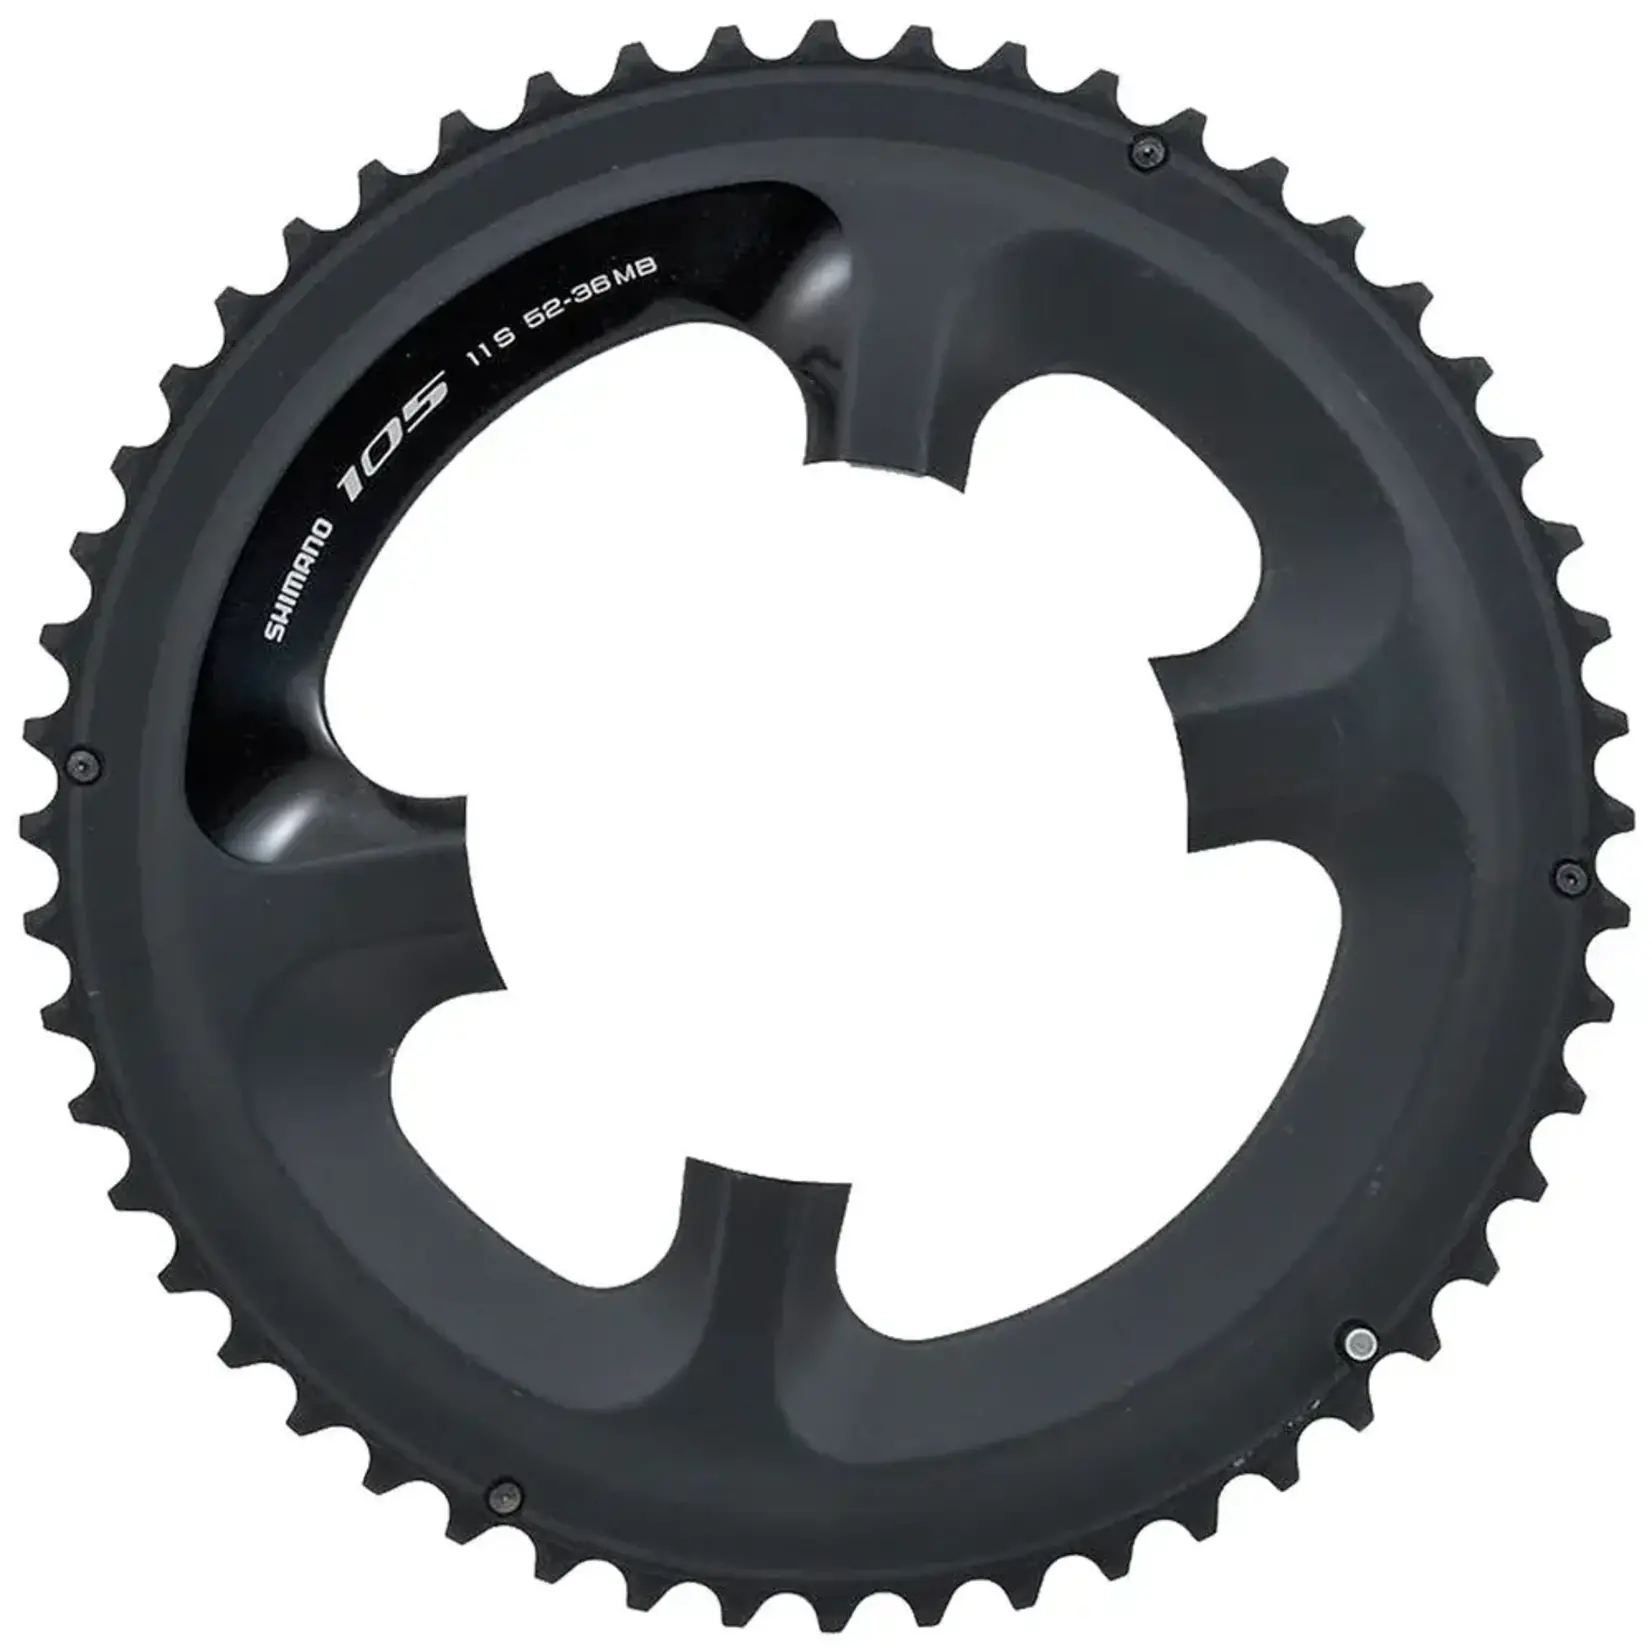 Shimano FC-5800 CHAINRING 52T-MB for 52-36T BLACK